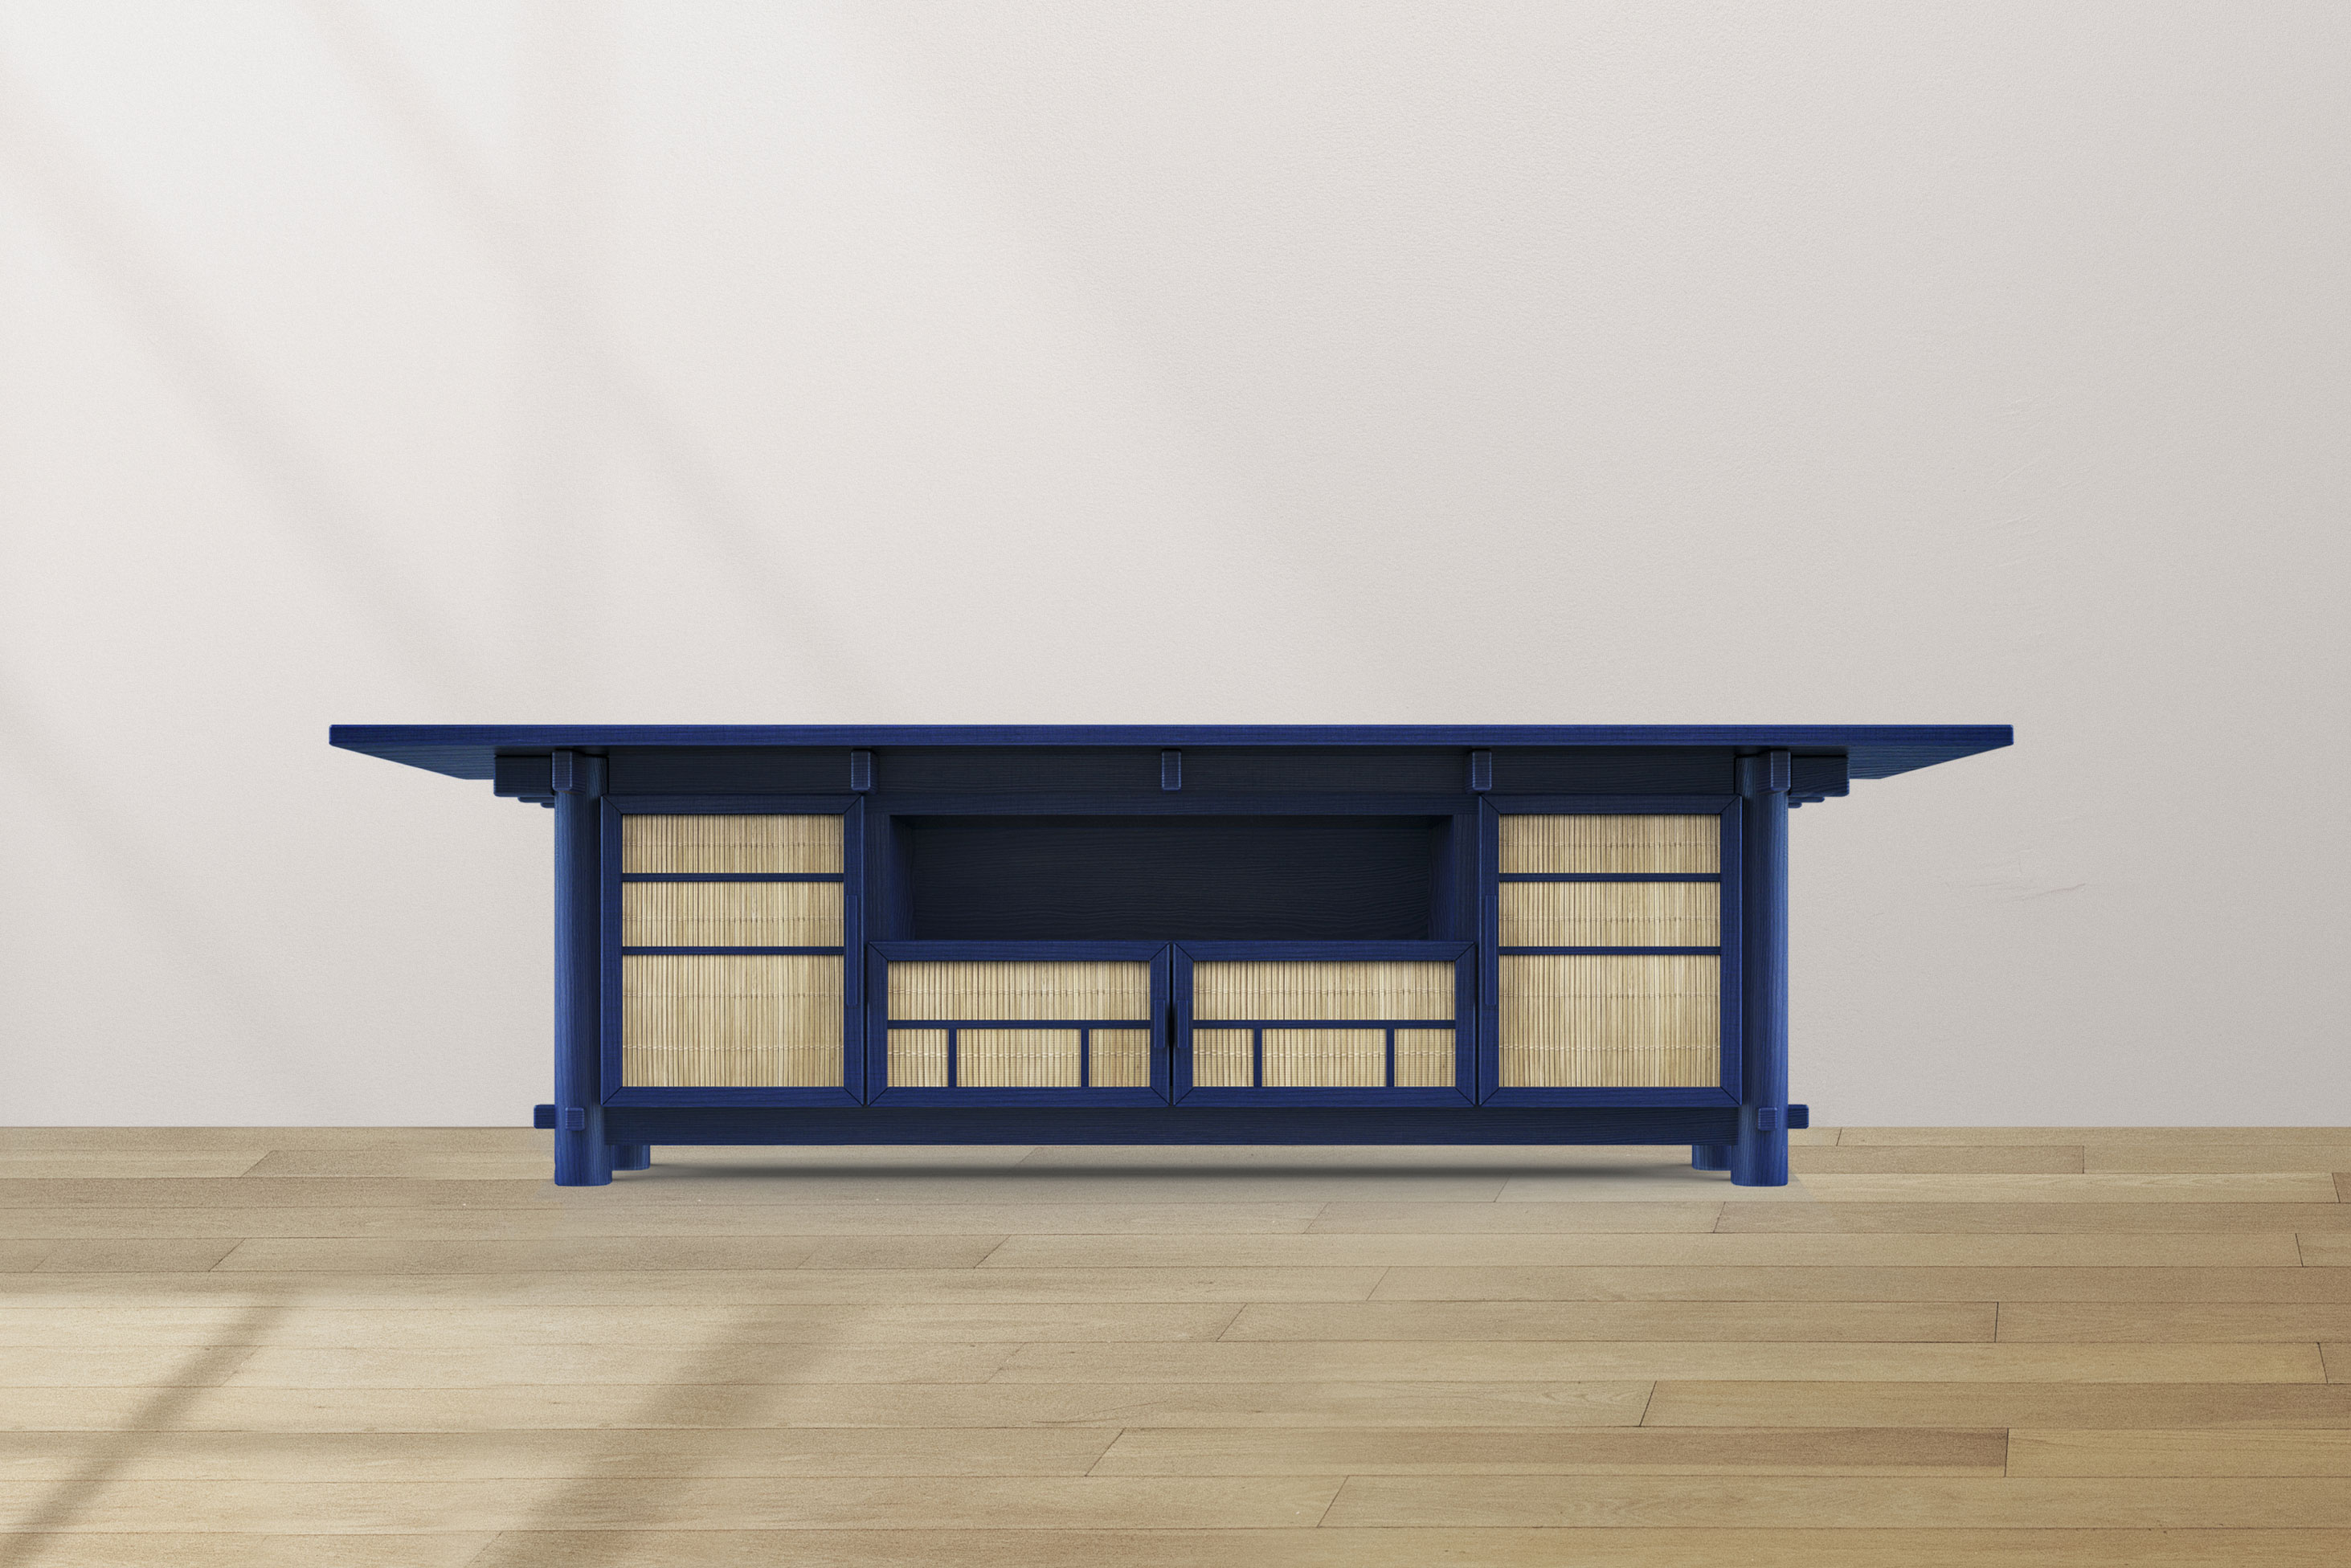 An architectural model which has blue support structured - roof, plyons and railings, and straw-coloured mats that are a barrier to the outside. The model sits on a blonde-wooden floor and against a white wall.